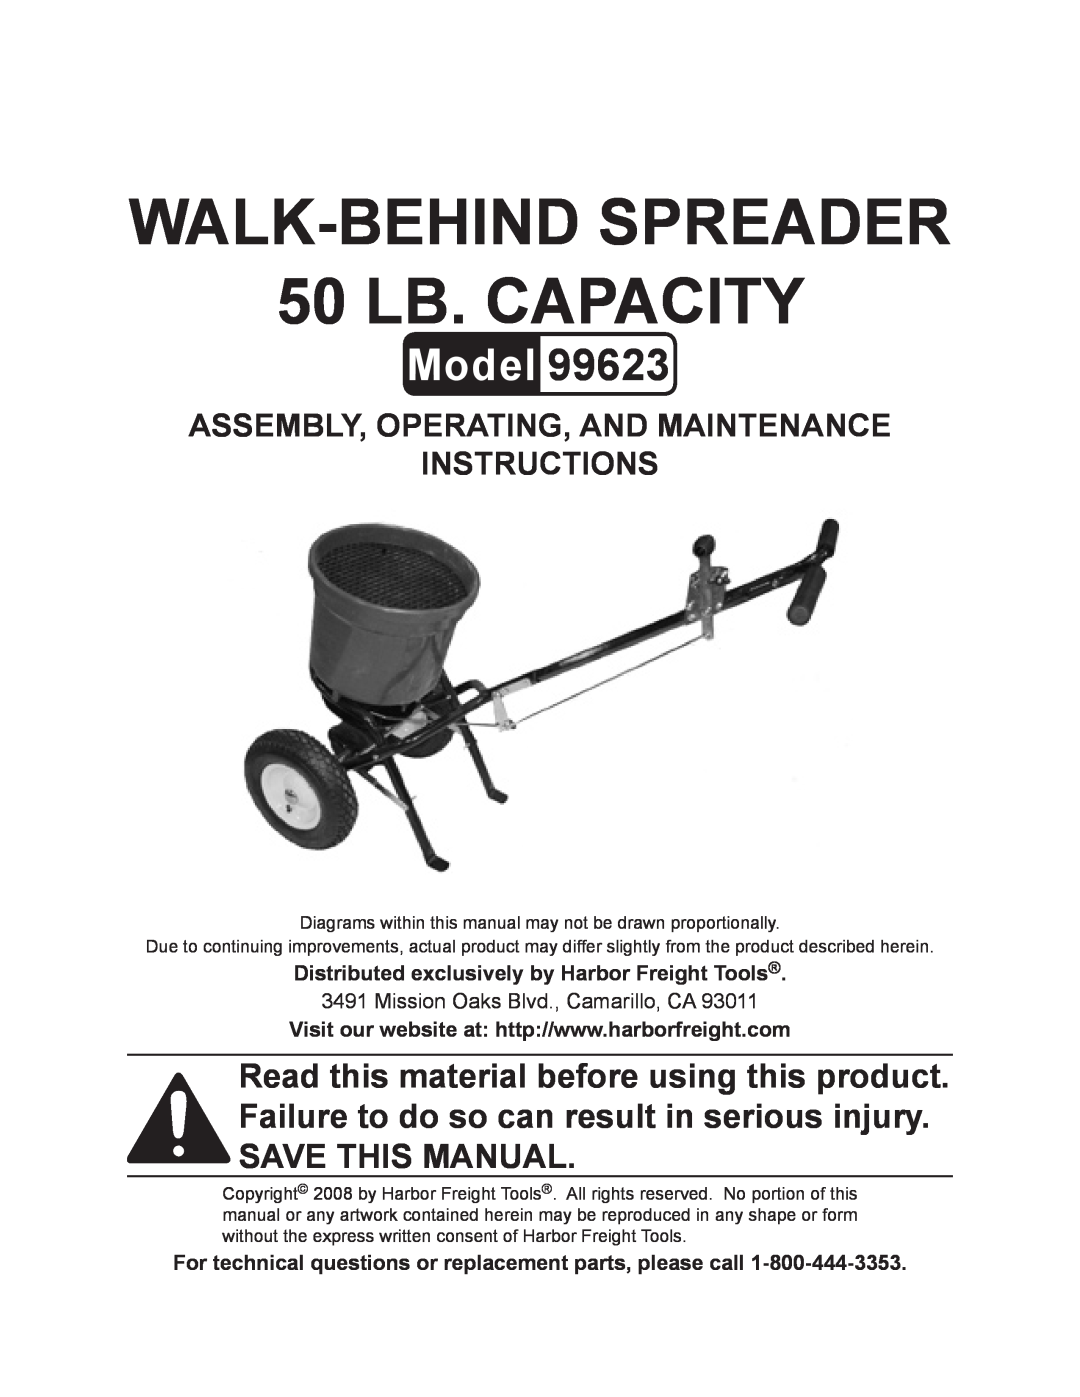 Harbor Freight Tools 99623 manual Distributed exclusively by Harbor Freight Tools, WALK-BEHIND SPREADER 50 LB. CAPACITY 